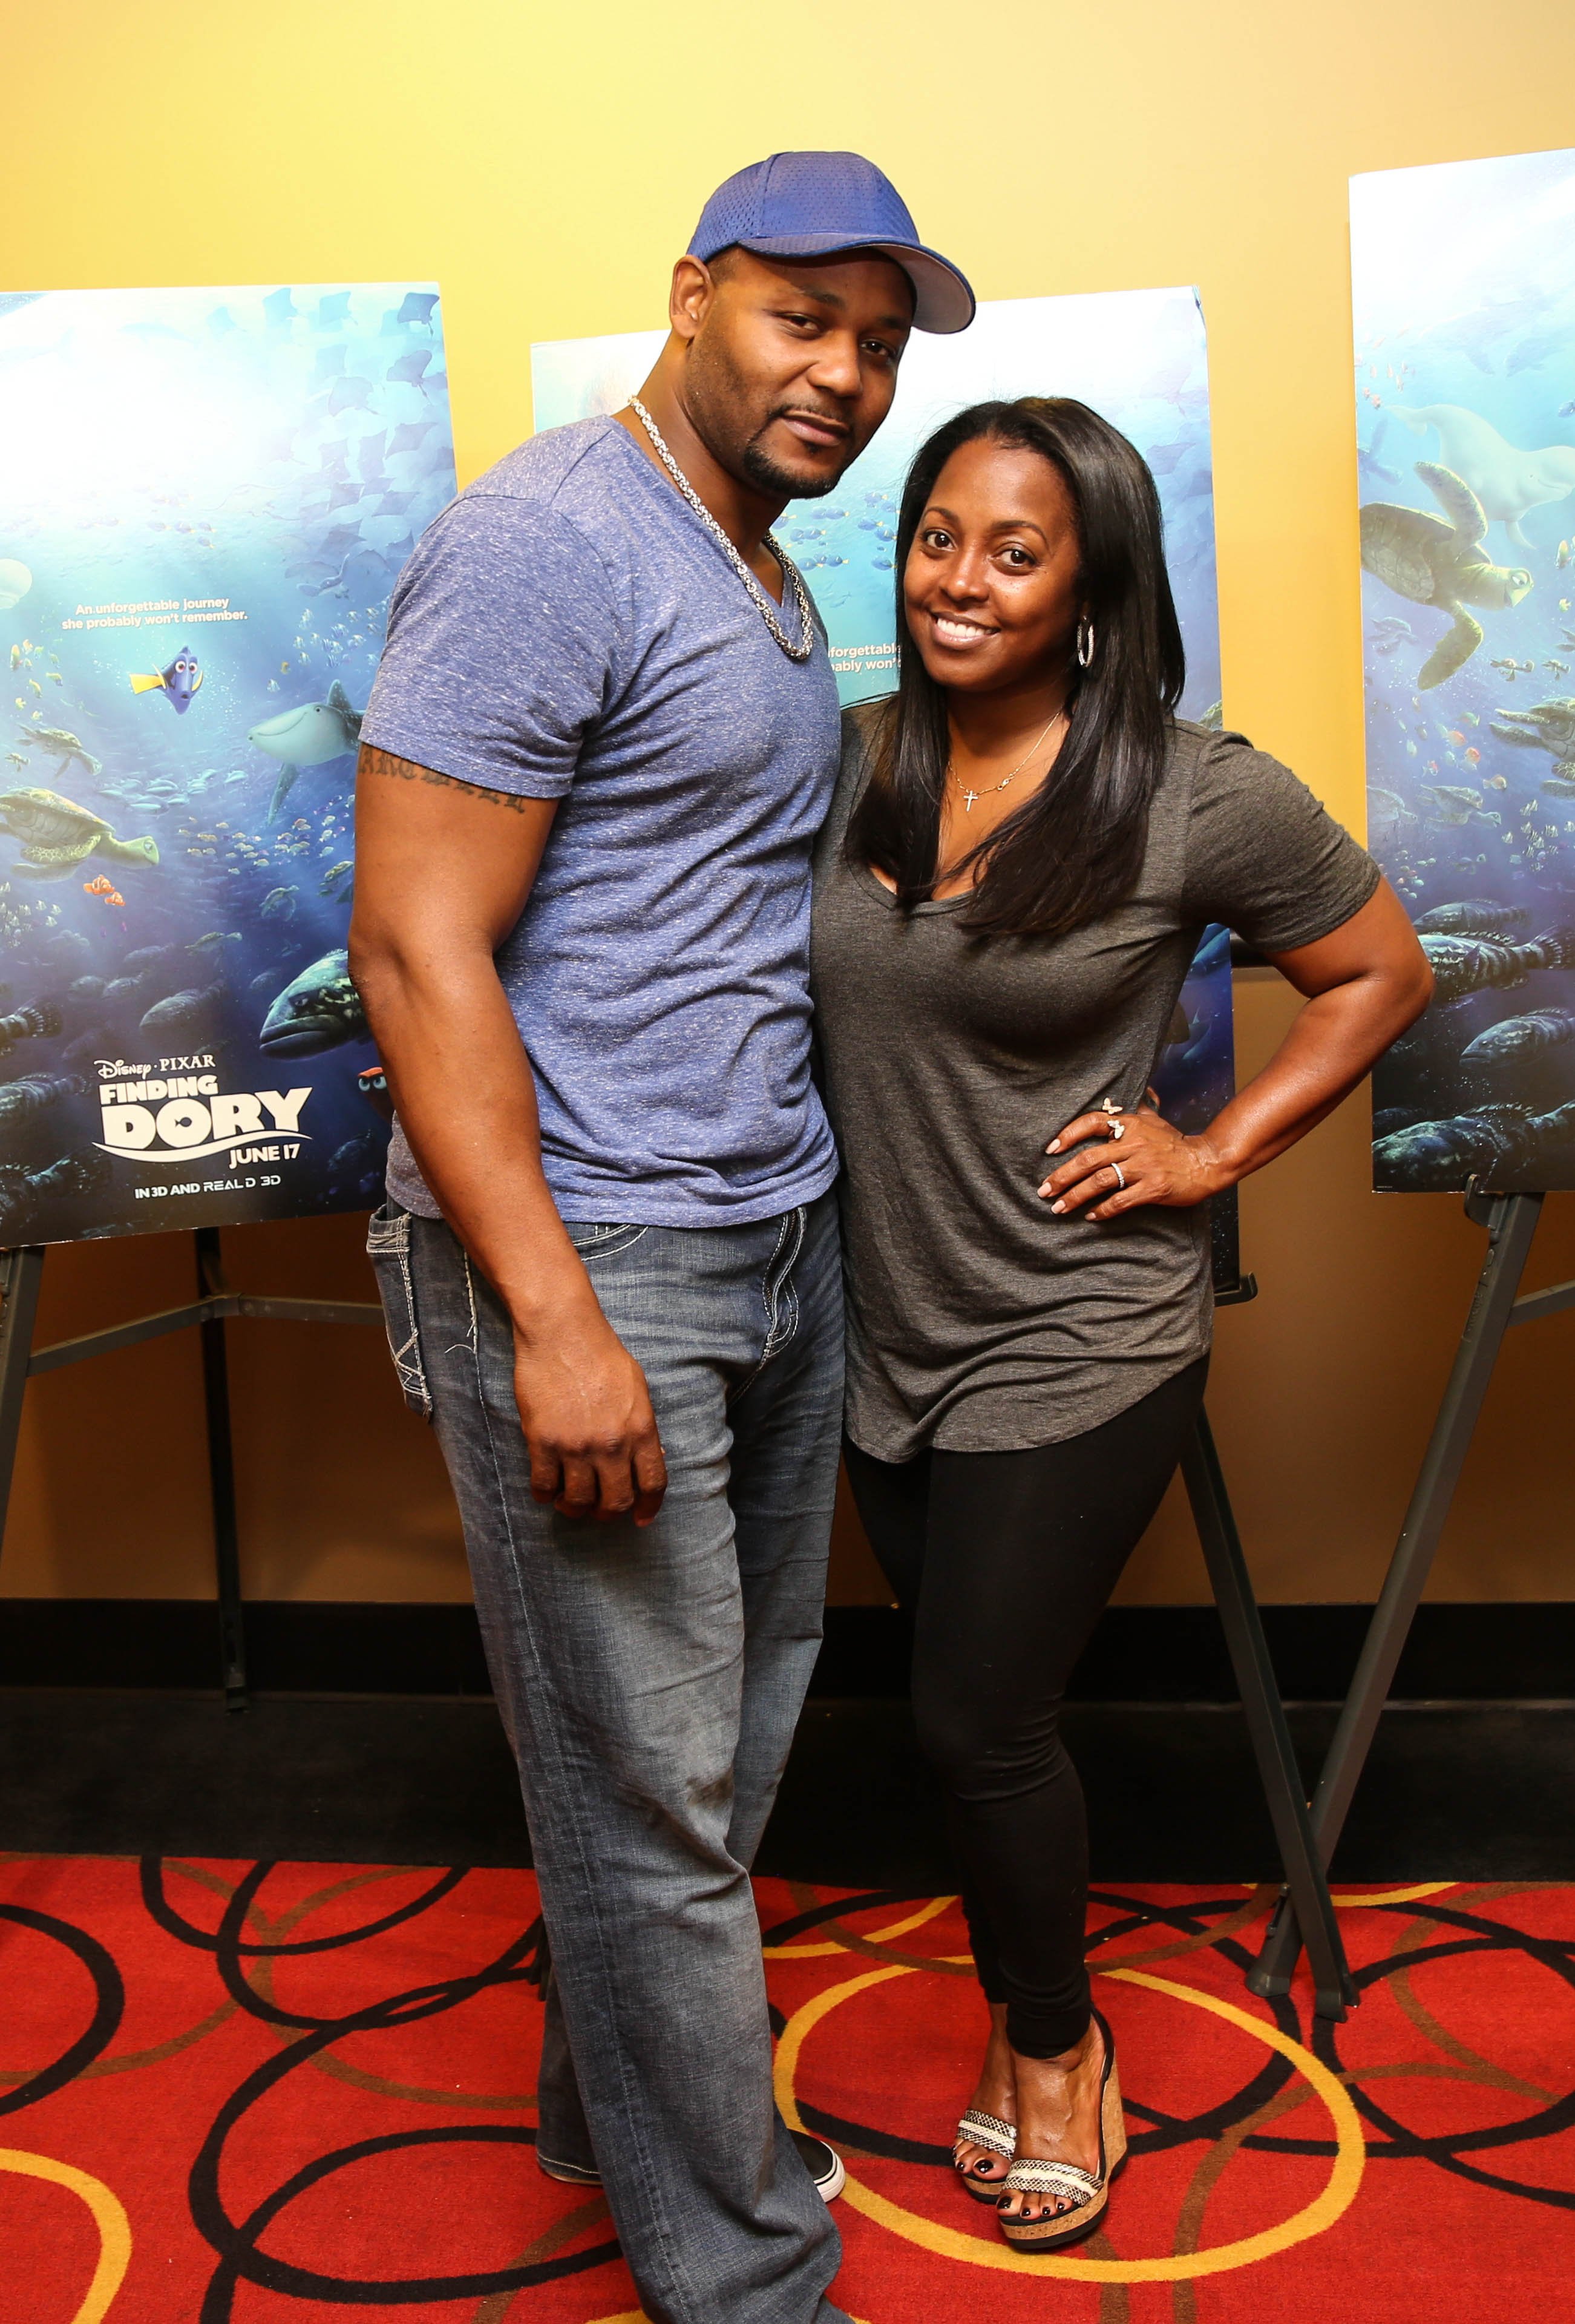 Keshia Knight Pulliam and Ed Hartwell attending the 'Finding Dory' advance screening at AMC Phipps Plaza on June 15, 2016 in Atlanta, Georgia. | Source: Getty